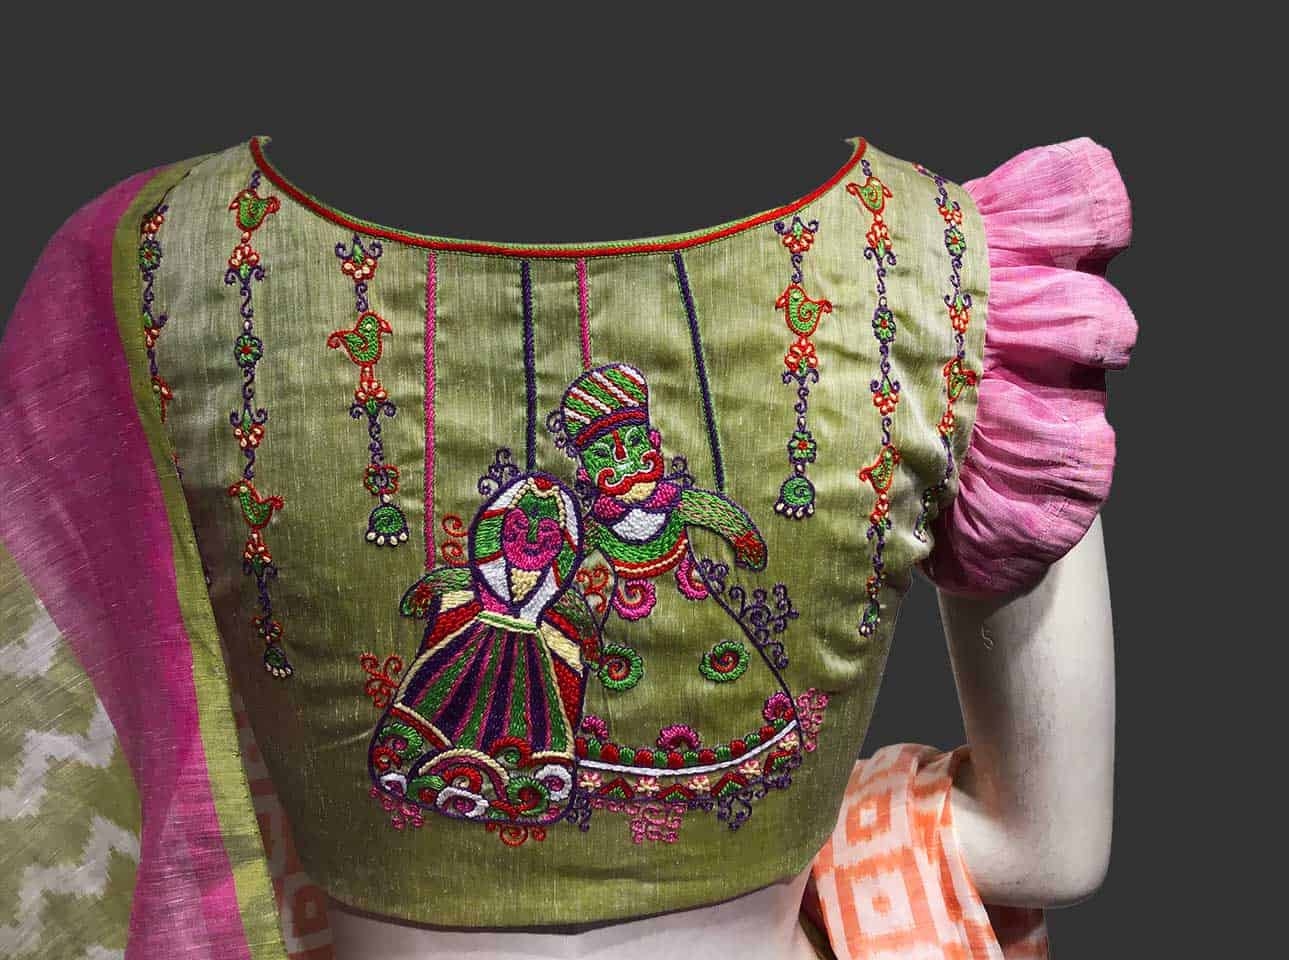 Simple Machine Embroidery Designs For Saree Blouse Healthy Care,Interior Design Furniture Arts And Crafts Movement